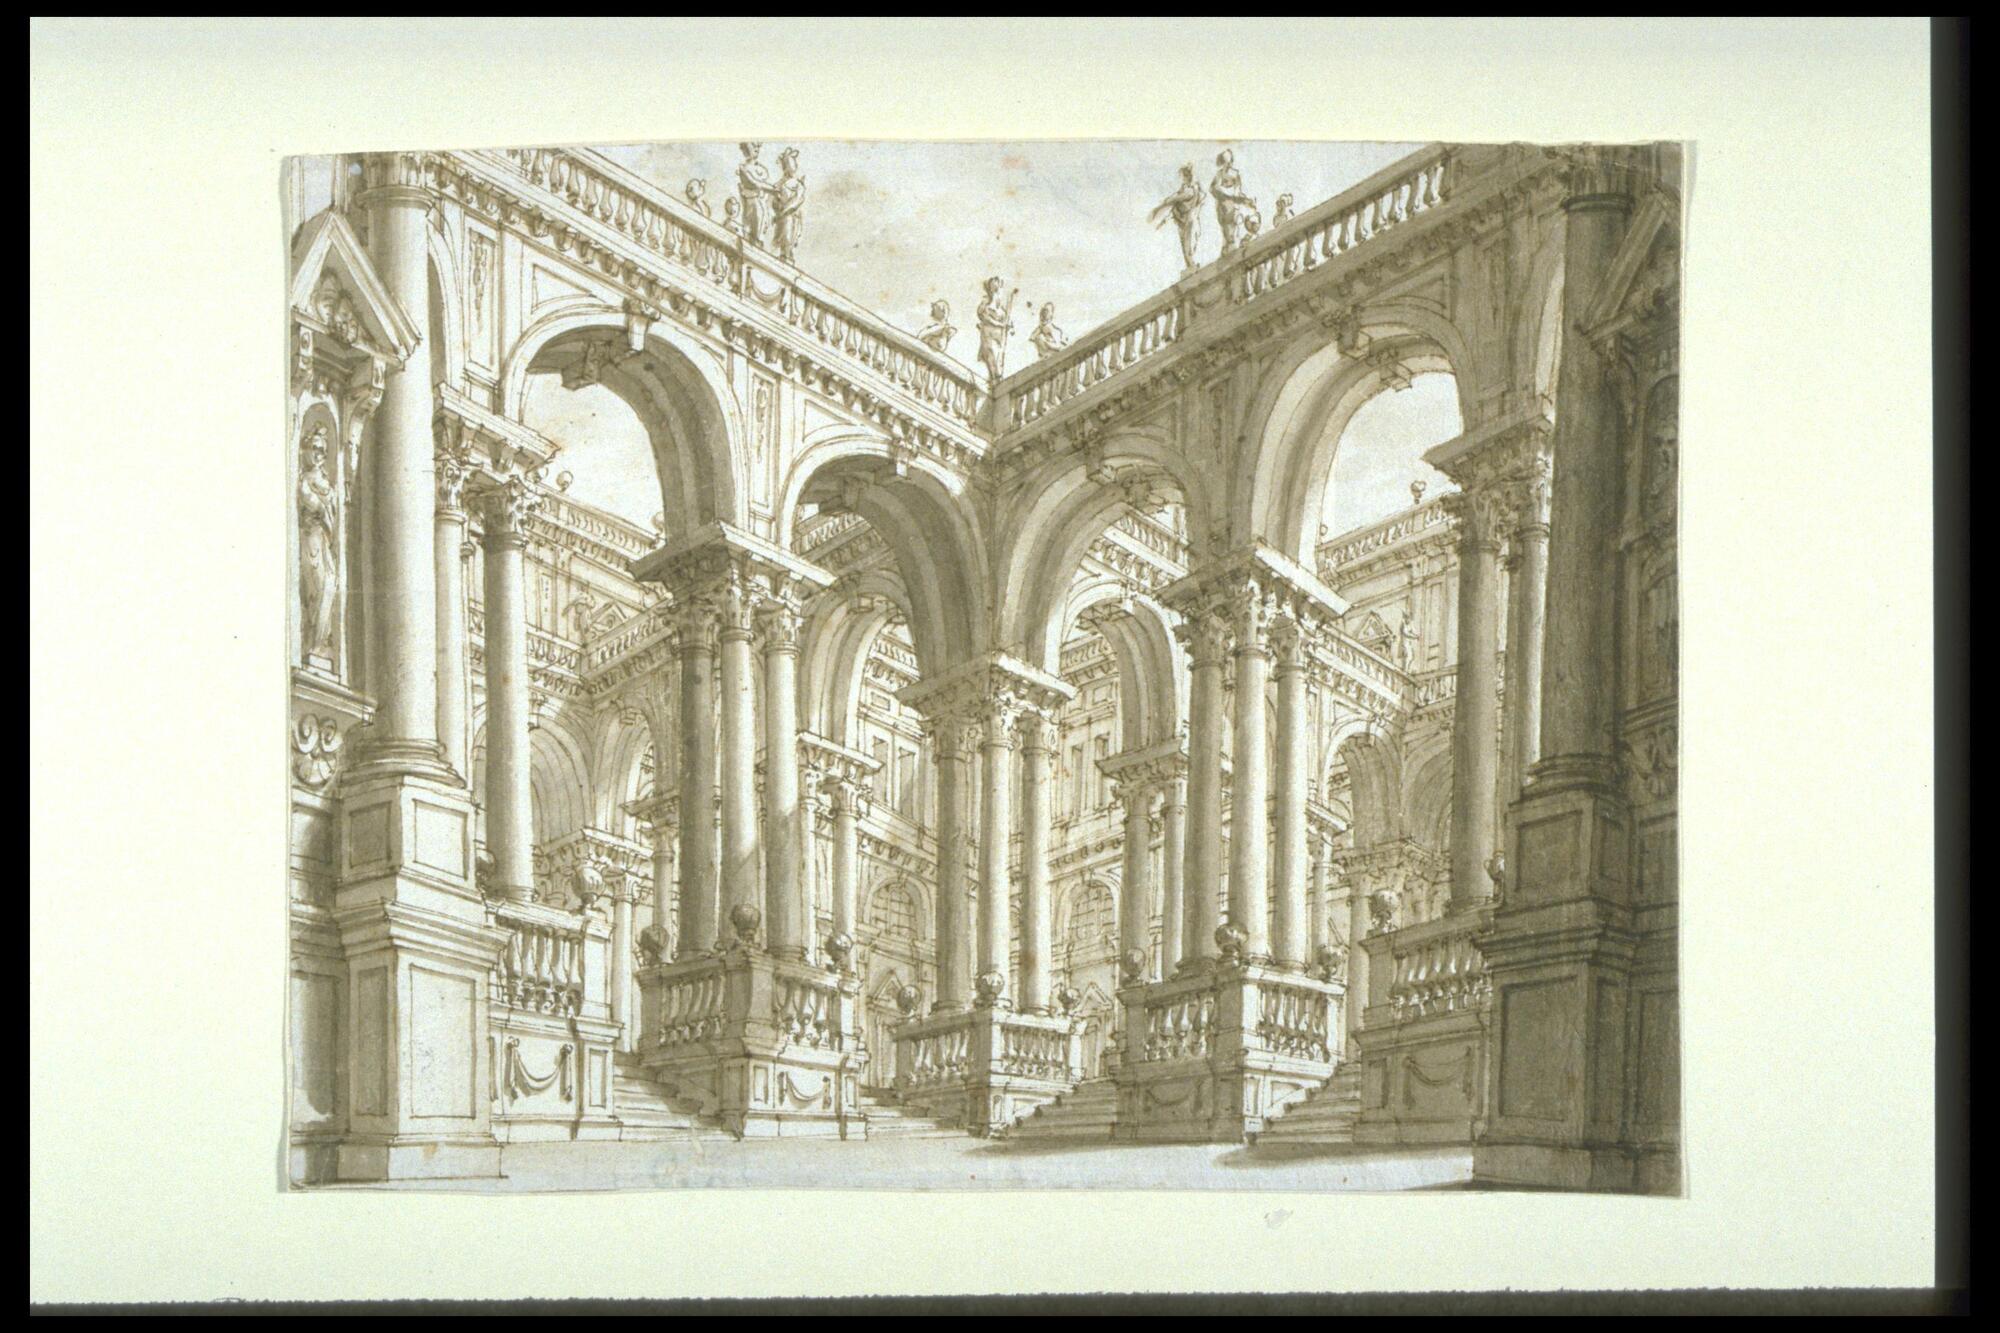 An intricate series of arches, stairs, and balustrades are presented obliquely.  The deepest recession into space is at the center of the design.  Seen from a low vantage point, the soaring columns and arcades create the illusion of deep space.